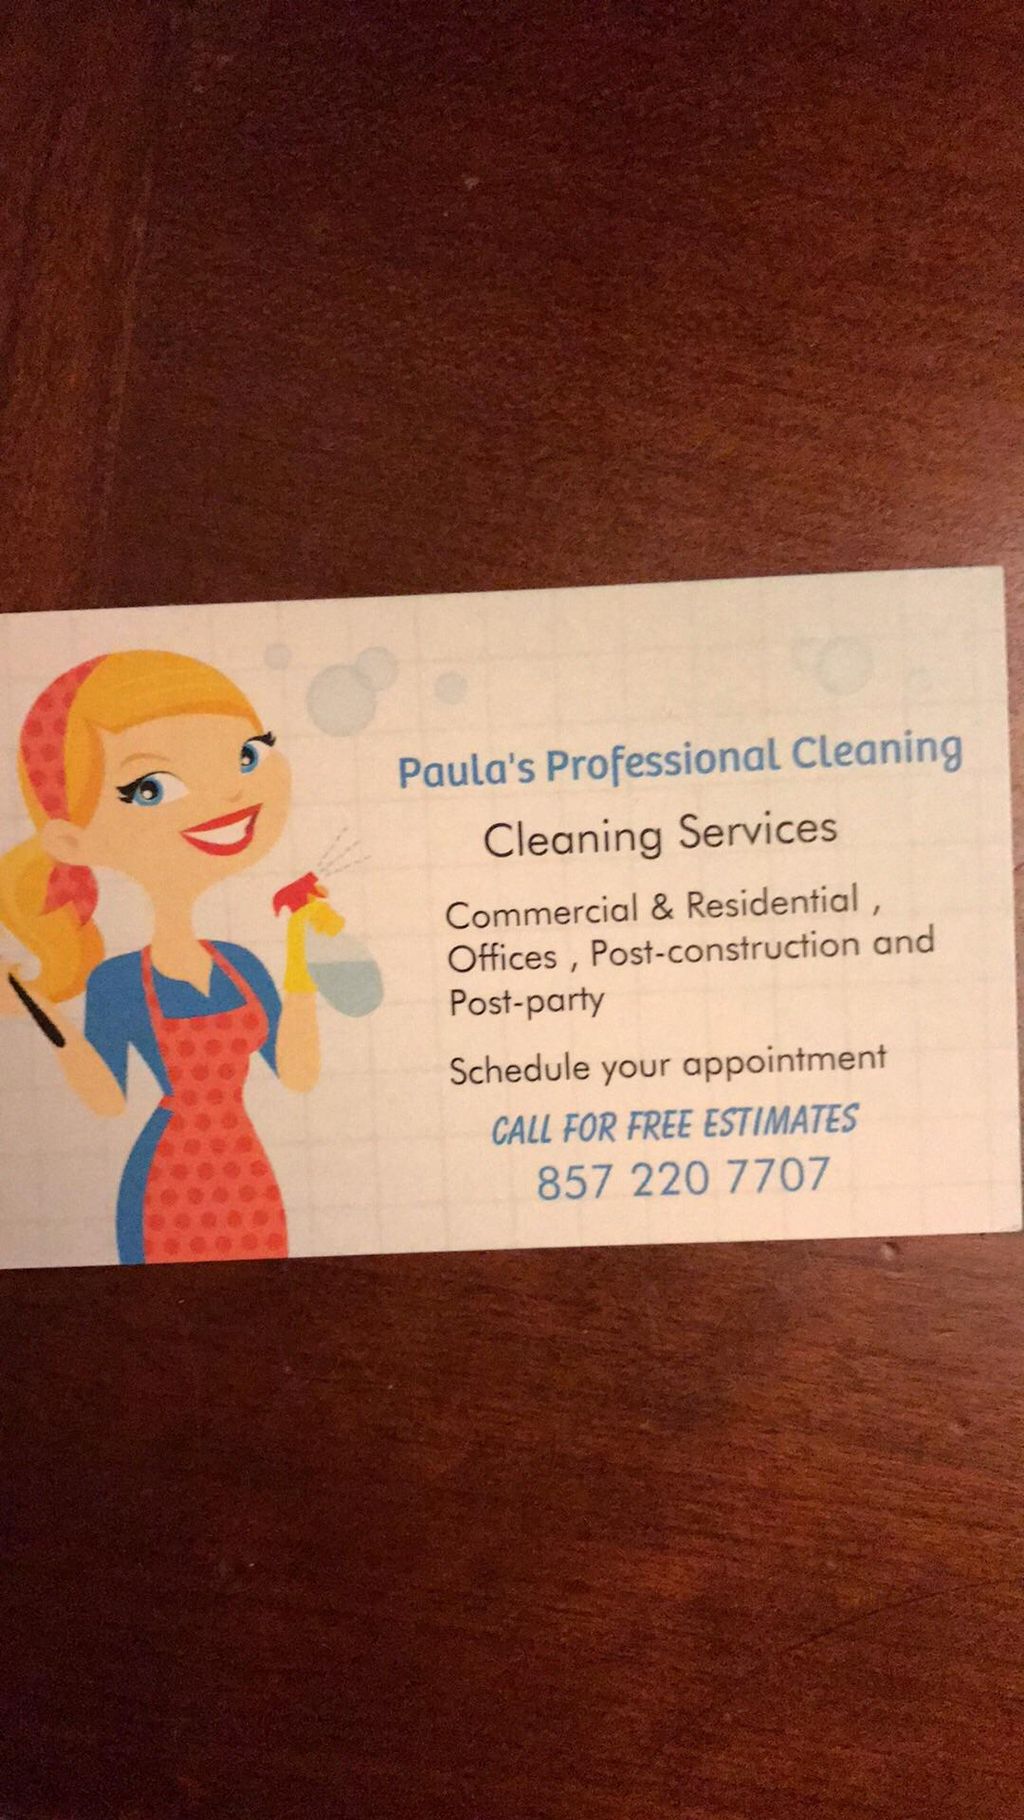 Paula's Professional Cleaning